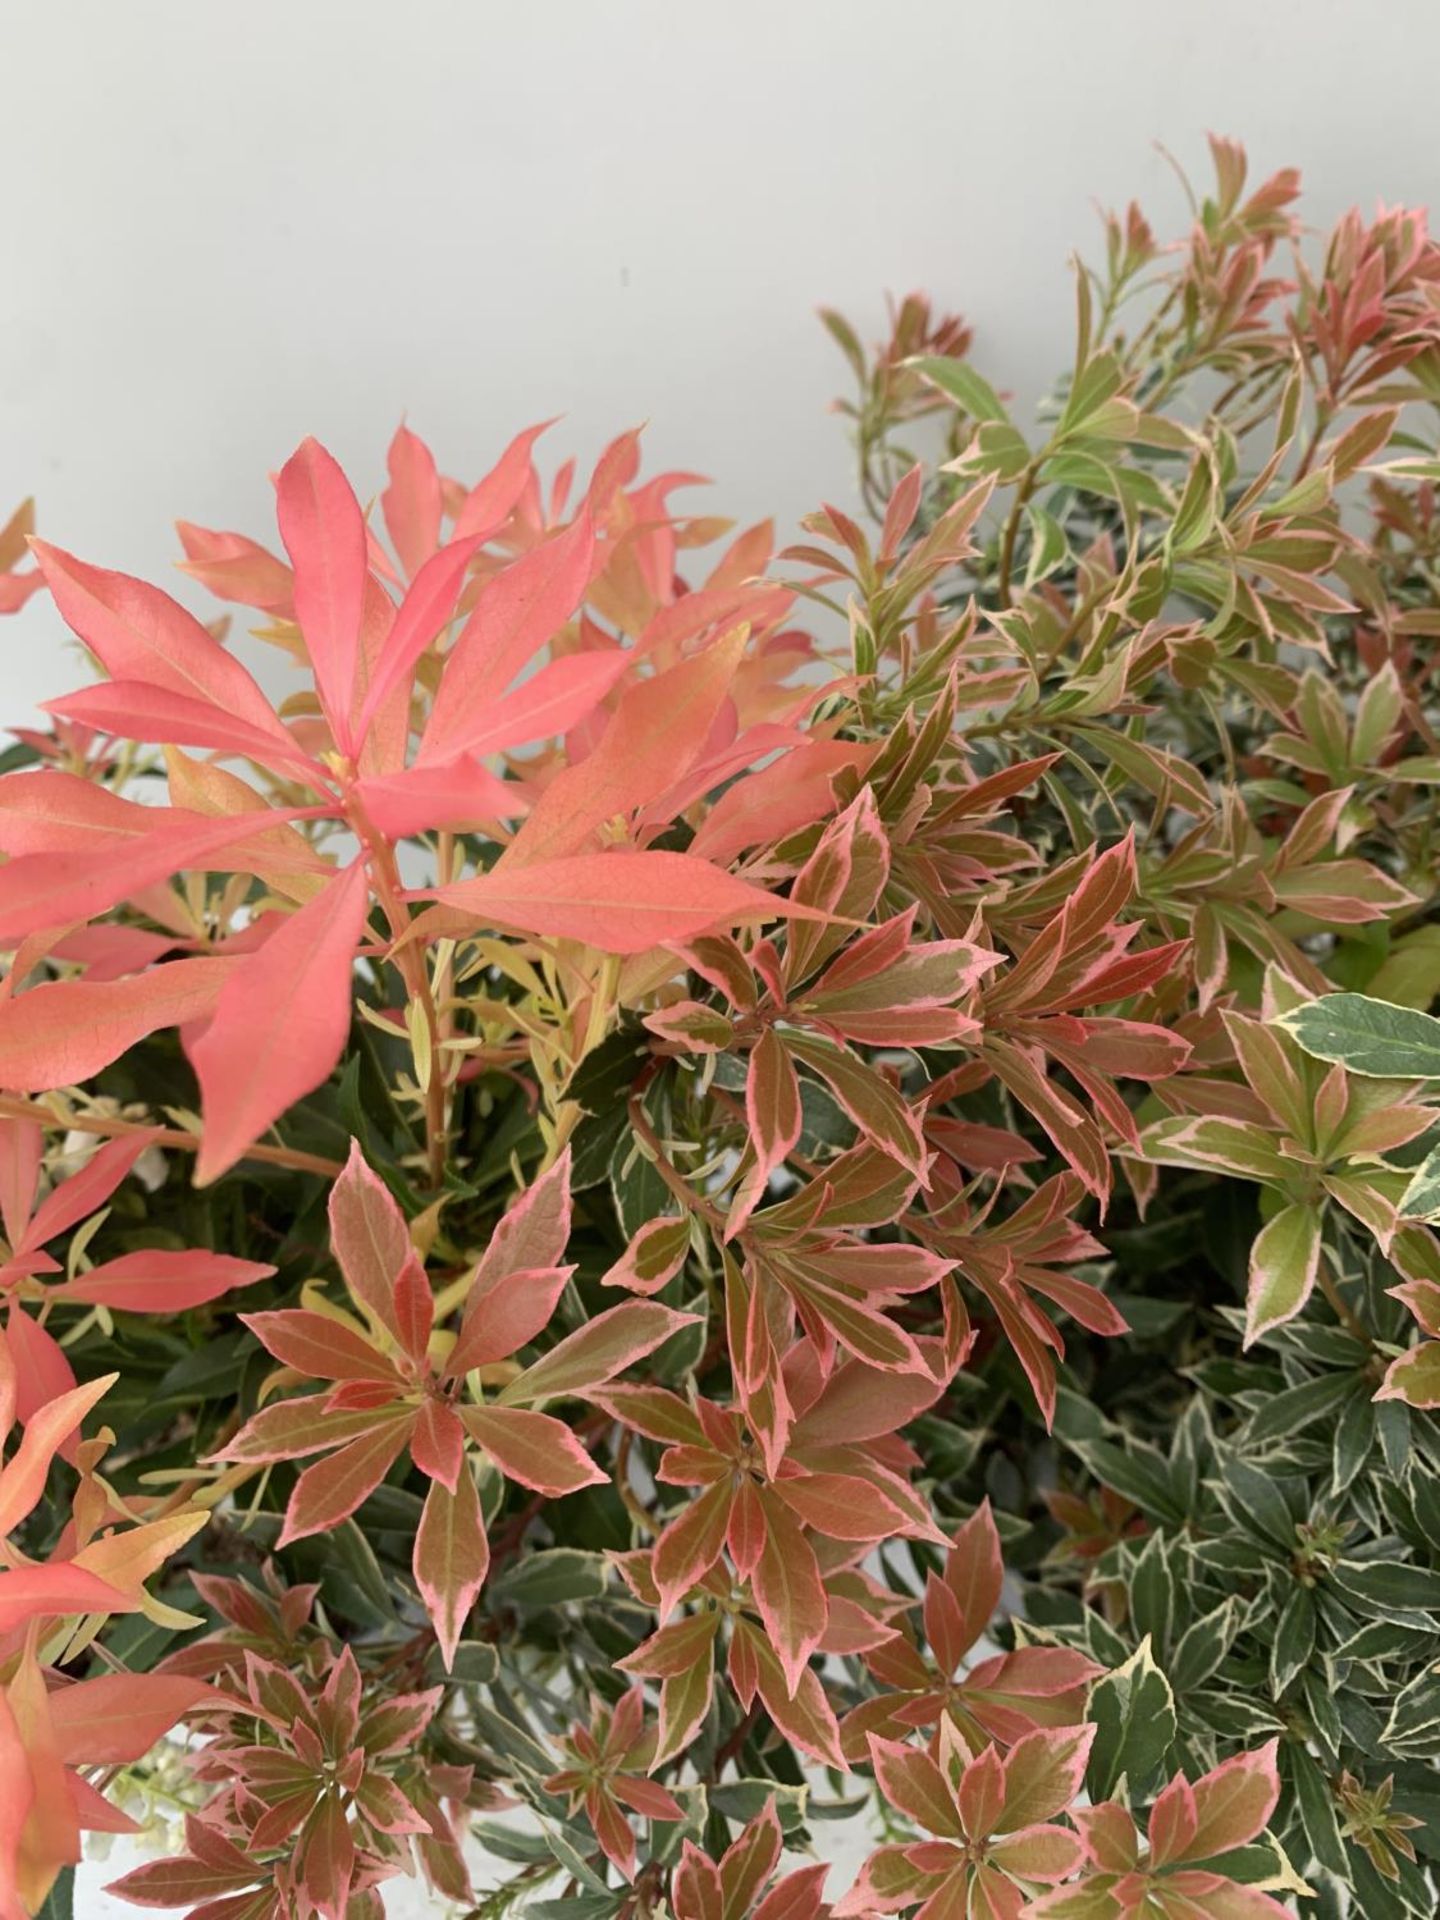 TWO PIERIS JAPONICA 'LITTLE HEATH' AND 'FOREST FLAME' IN 3 LTR POTS 50CM TALL PLUS VAT TO BE SOLD - Image 4 of 6